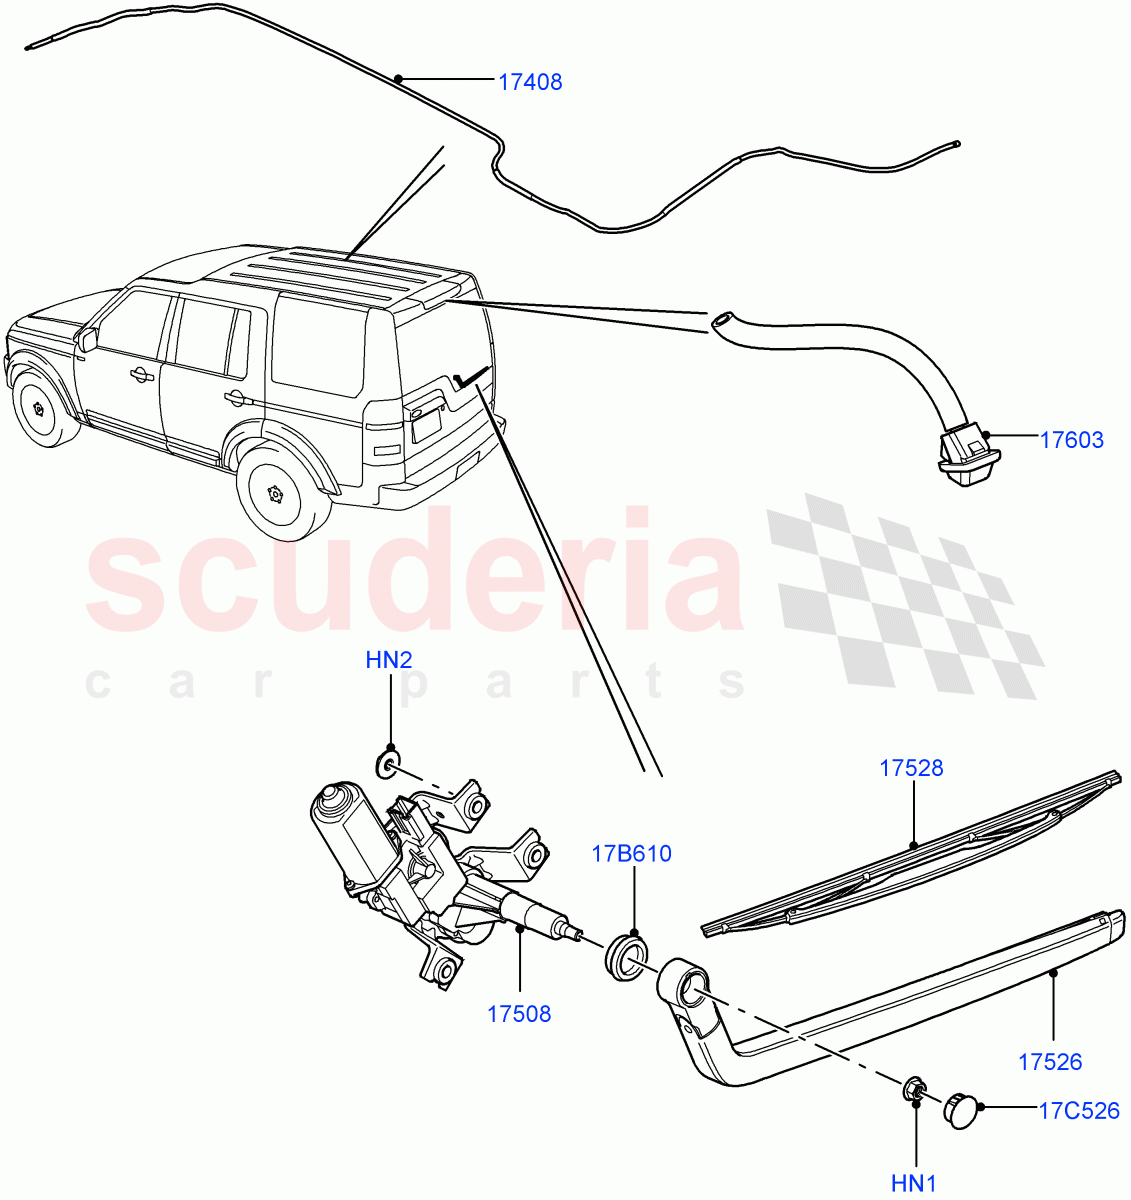 Rear Window Wiper And Washer((V)FROMAA000001) of Land Rover Land Rover Discovery 4 (2010-2016) [4.0 Petrol V6]